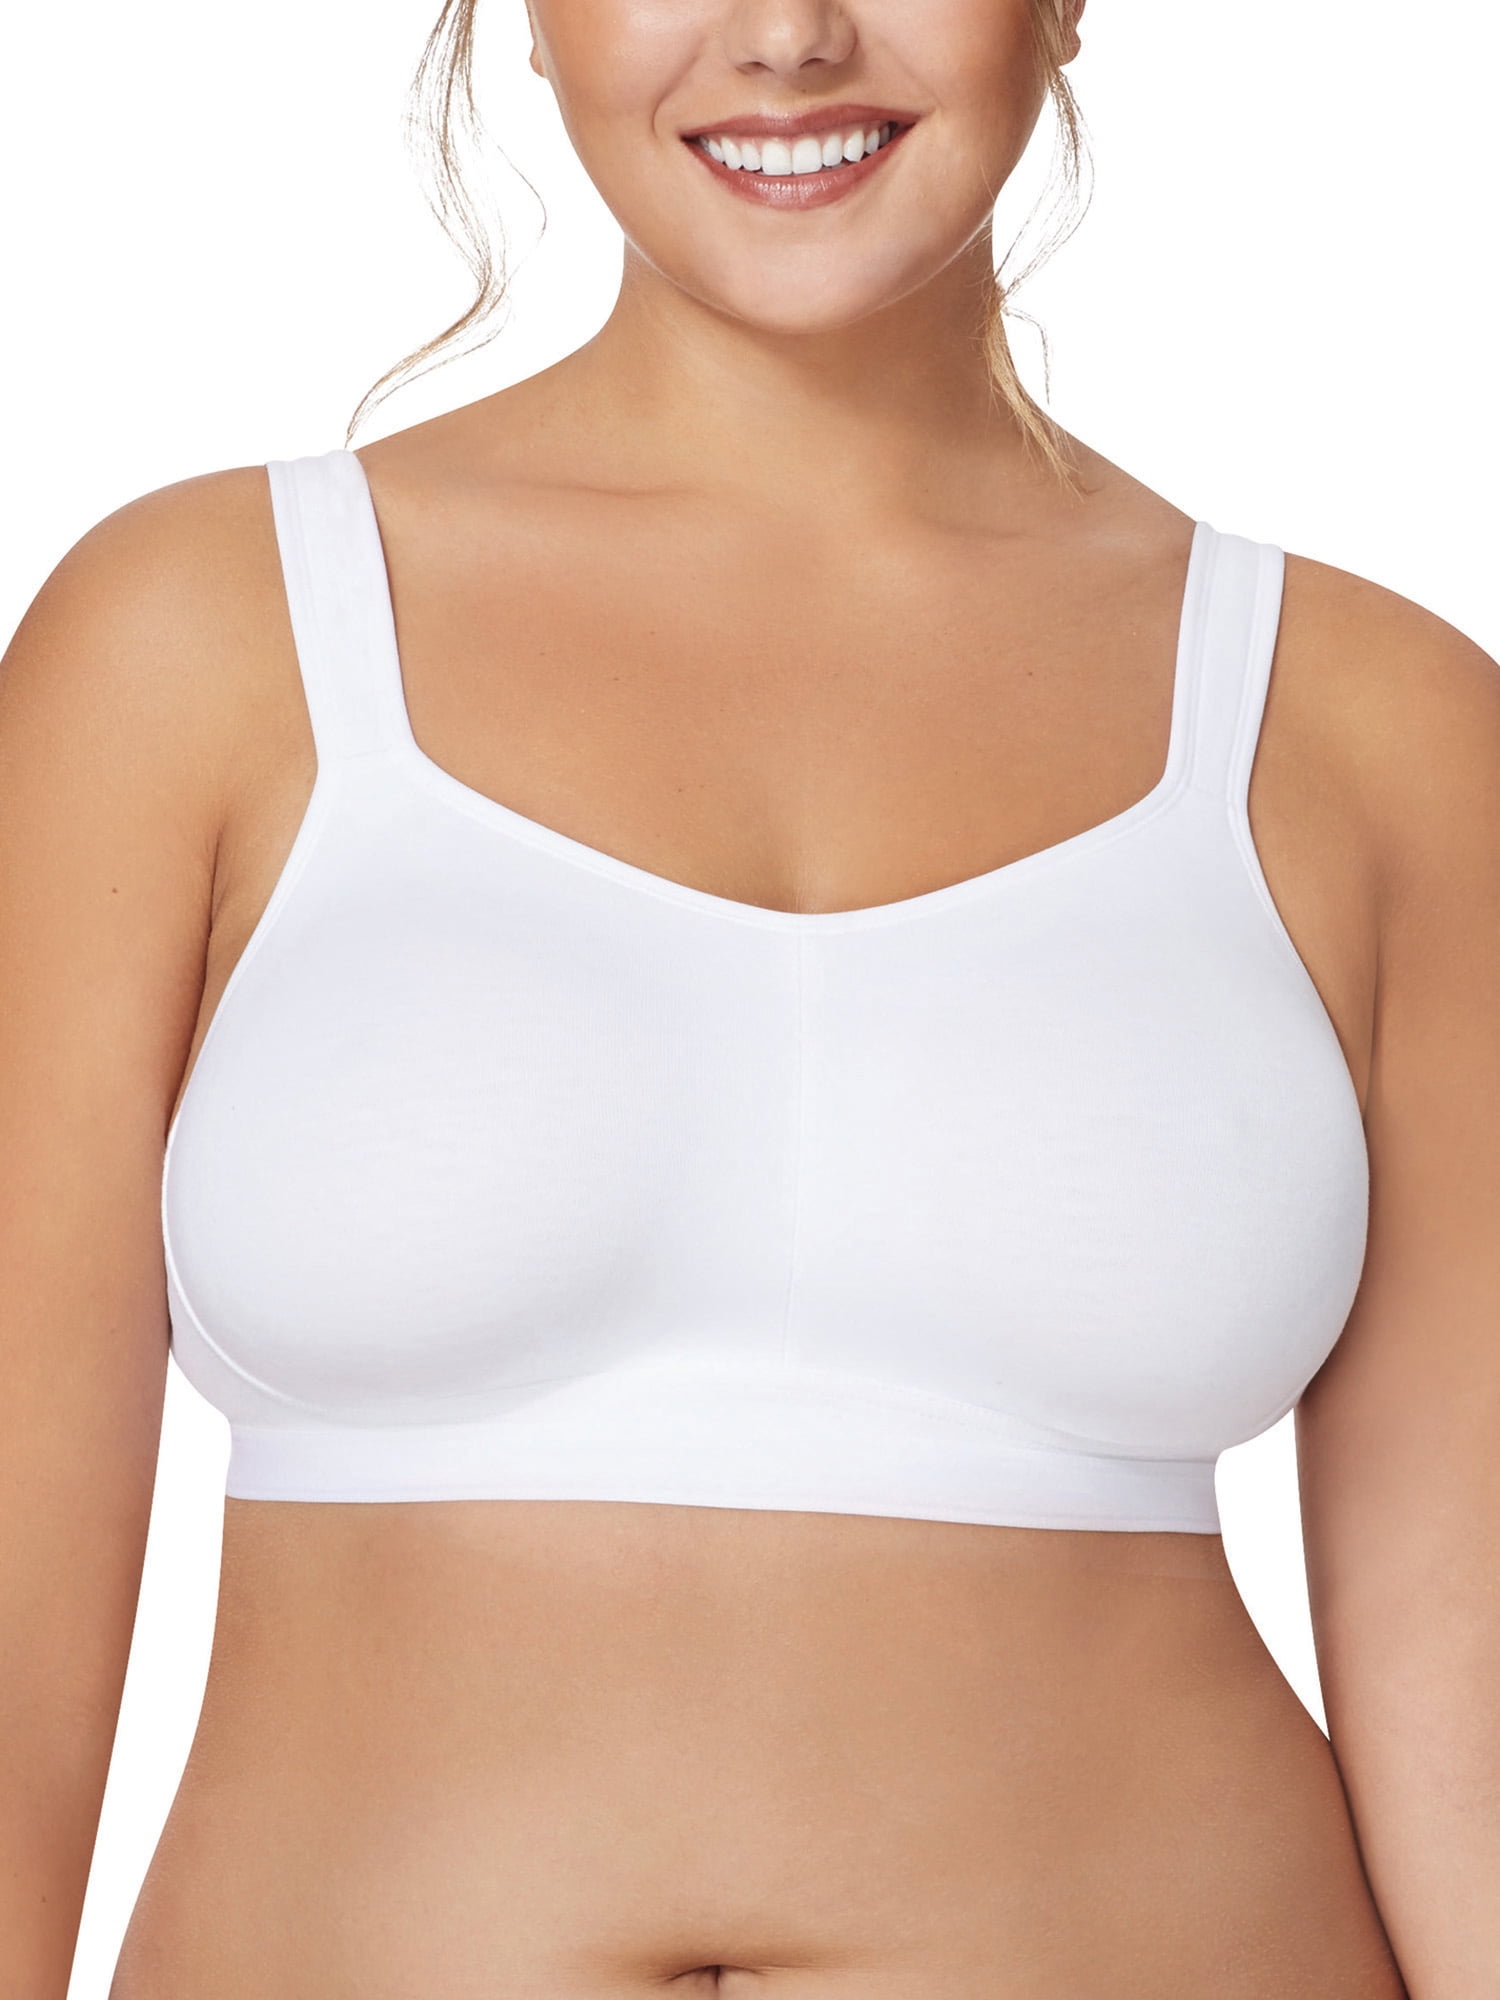 New Just My Size Women's Perfect Lift Wire Free Bra Style Number 1212 in White